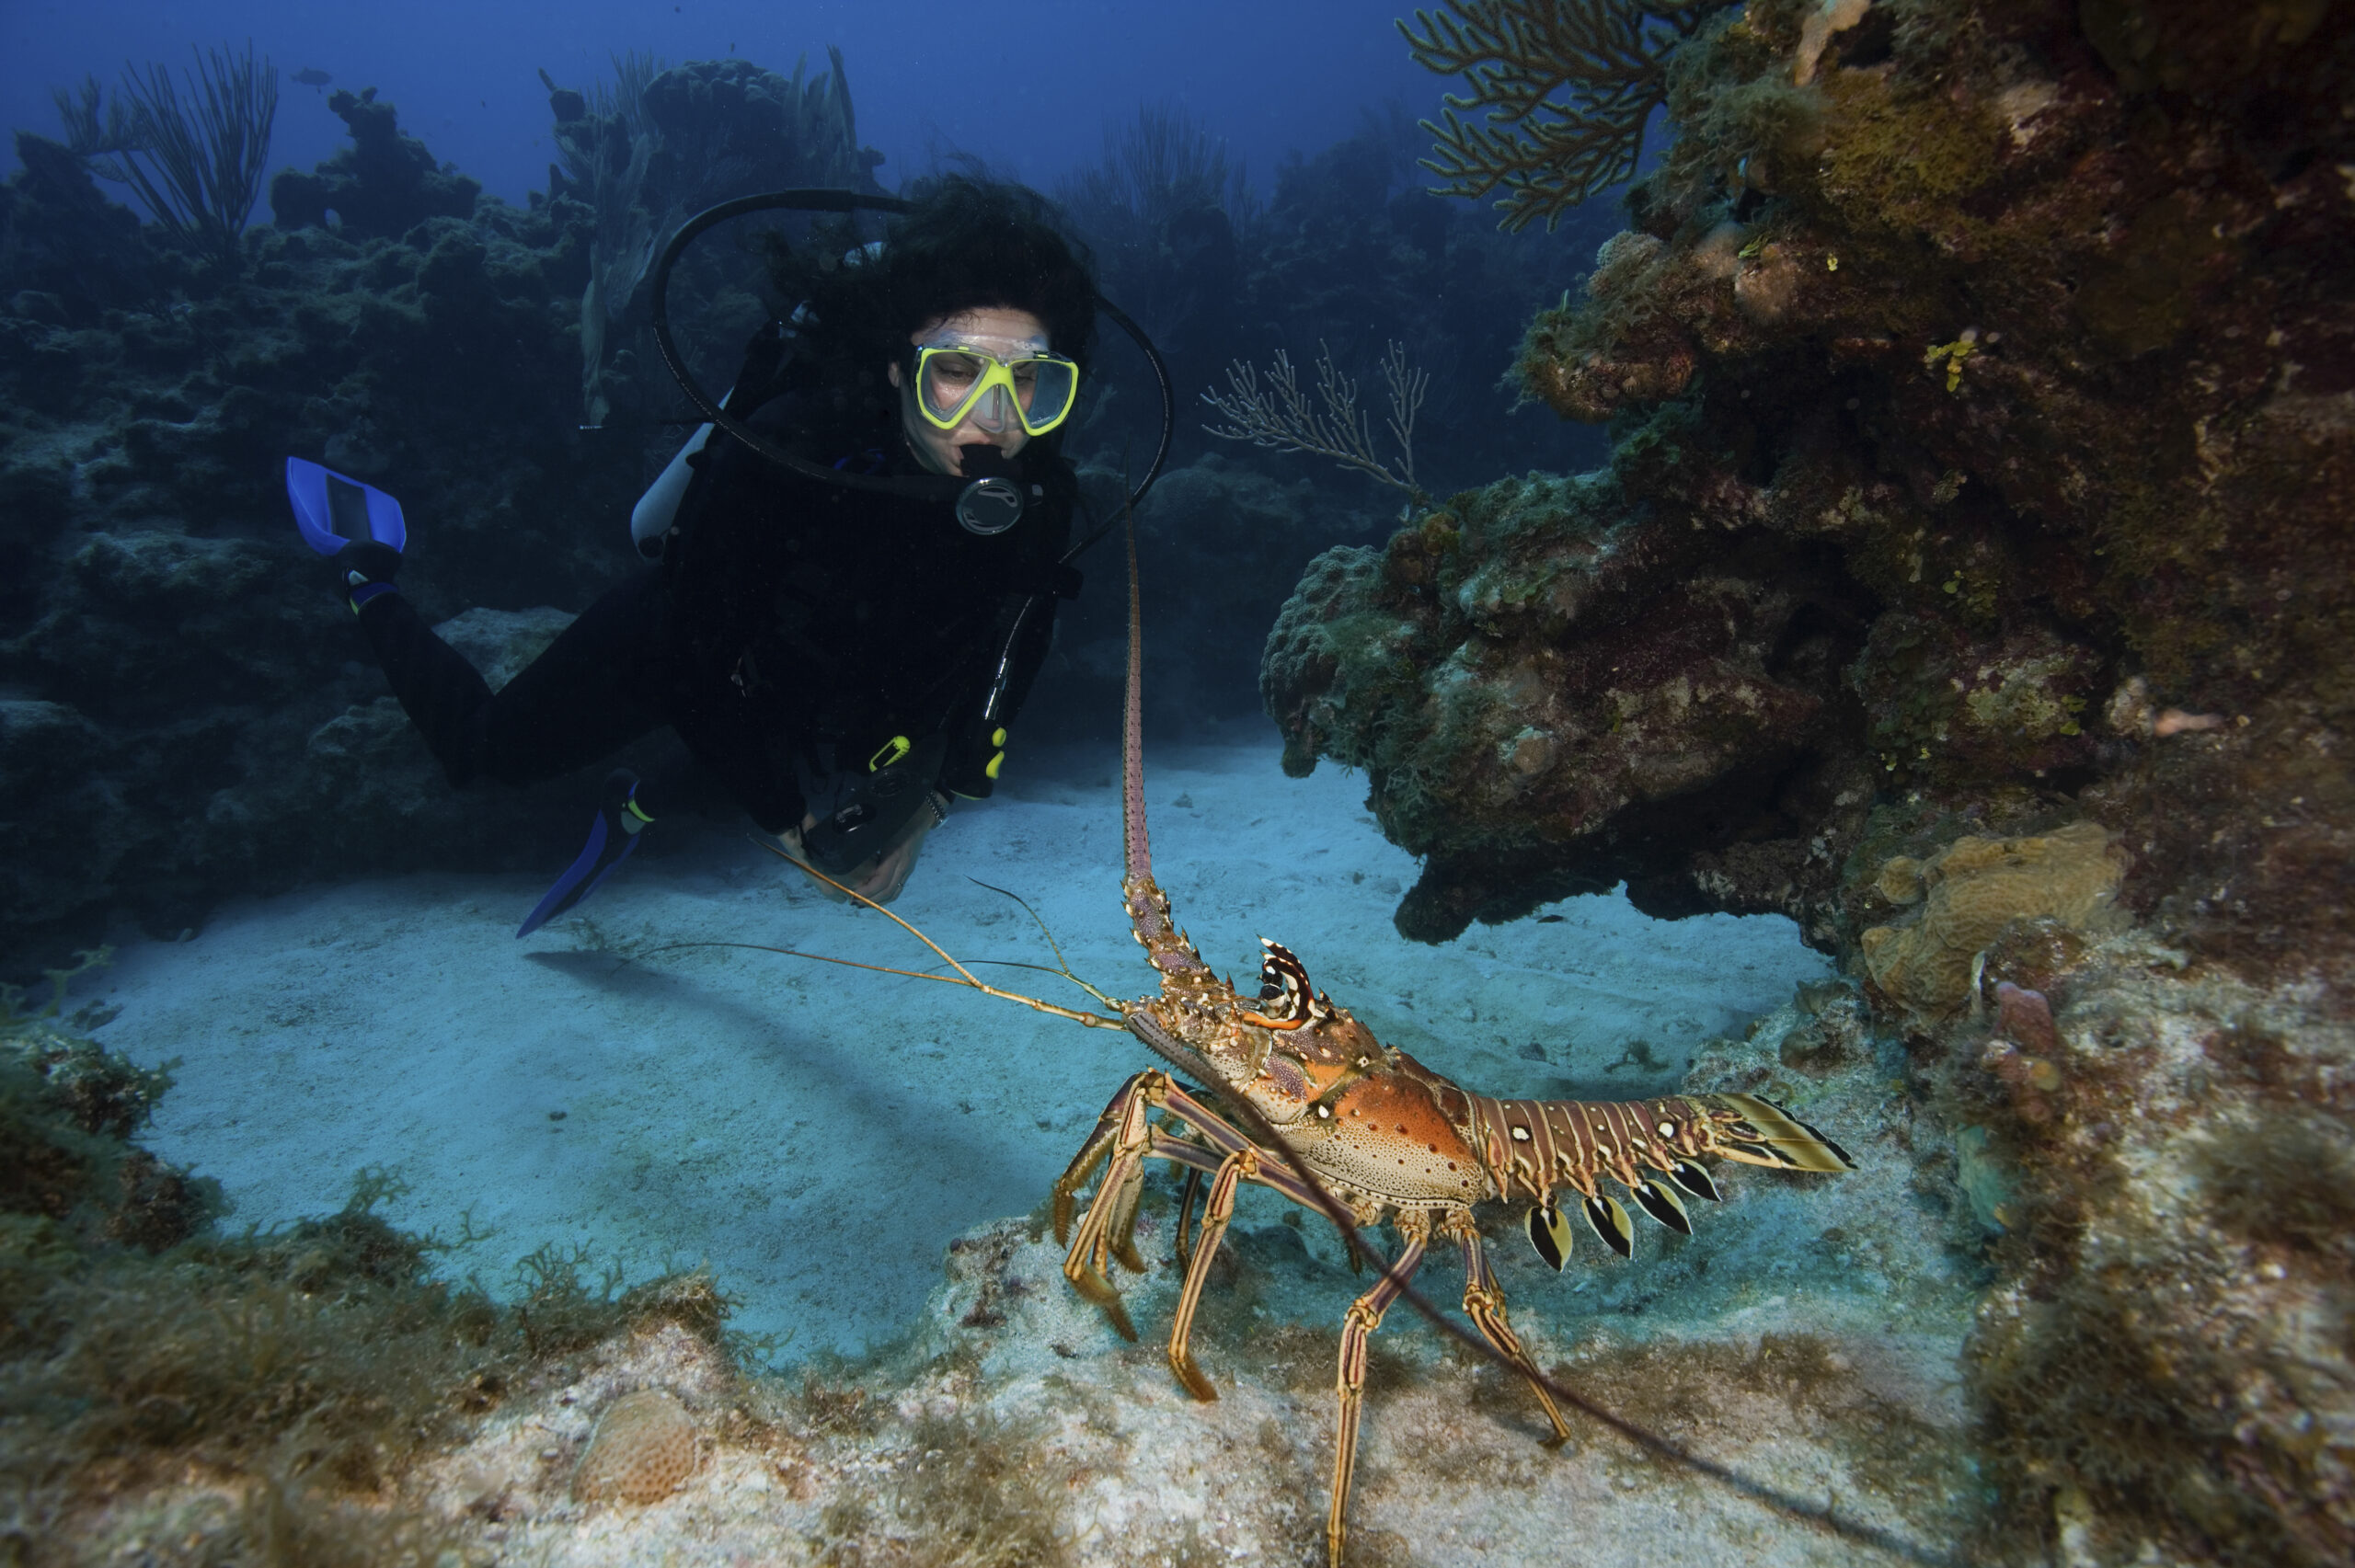 a spiny lobster panulirus argus intimidates a sc 2021 08 28 08 07 35 utc scaled Whole Foods Stop Selling Lobsters to Save Endangered Whales